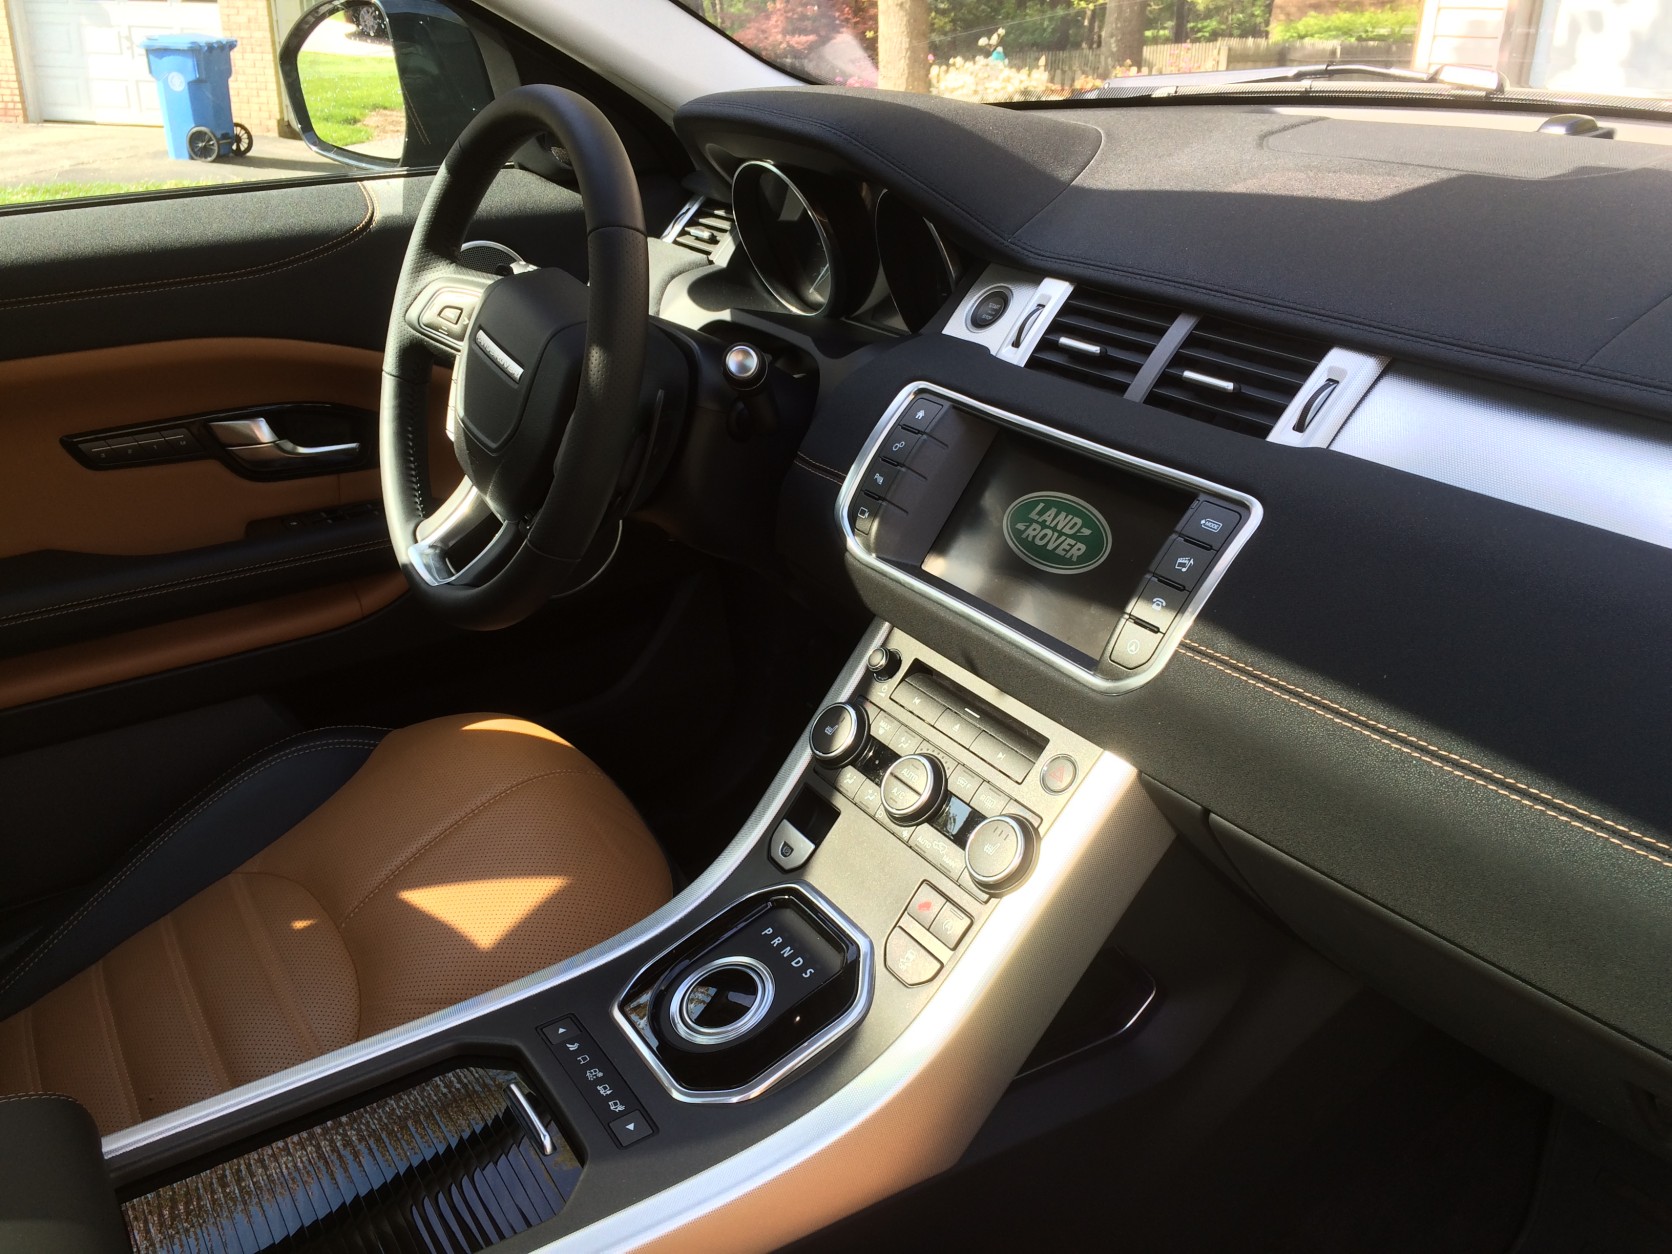 The buttons in this updated Evoque are now clearly marked and easy to read and react. (WTOP/Mike Parris)